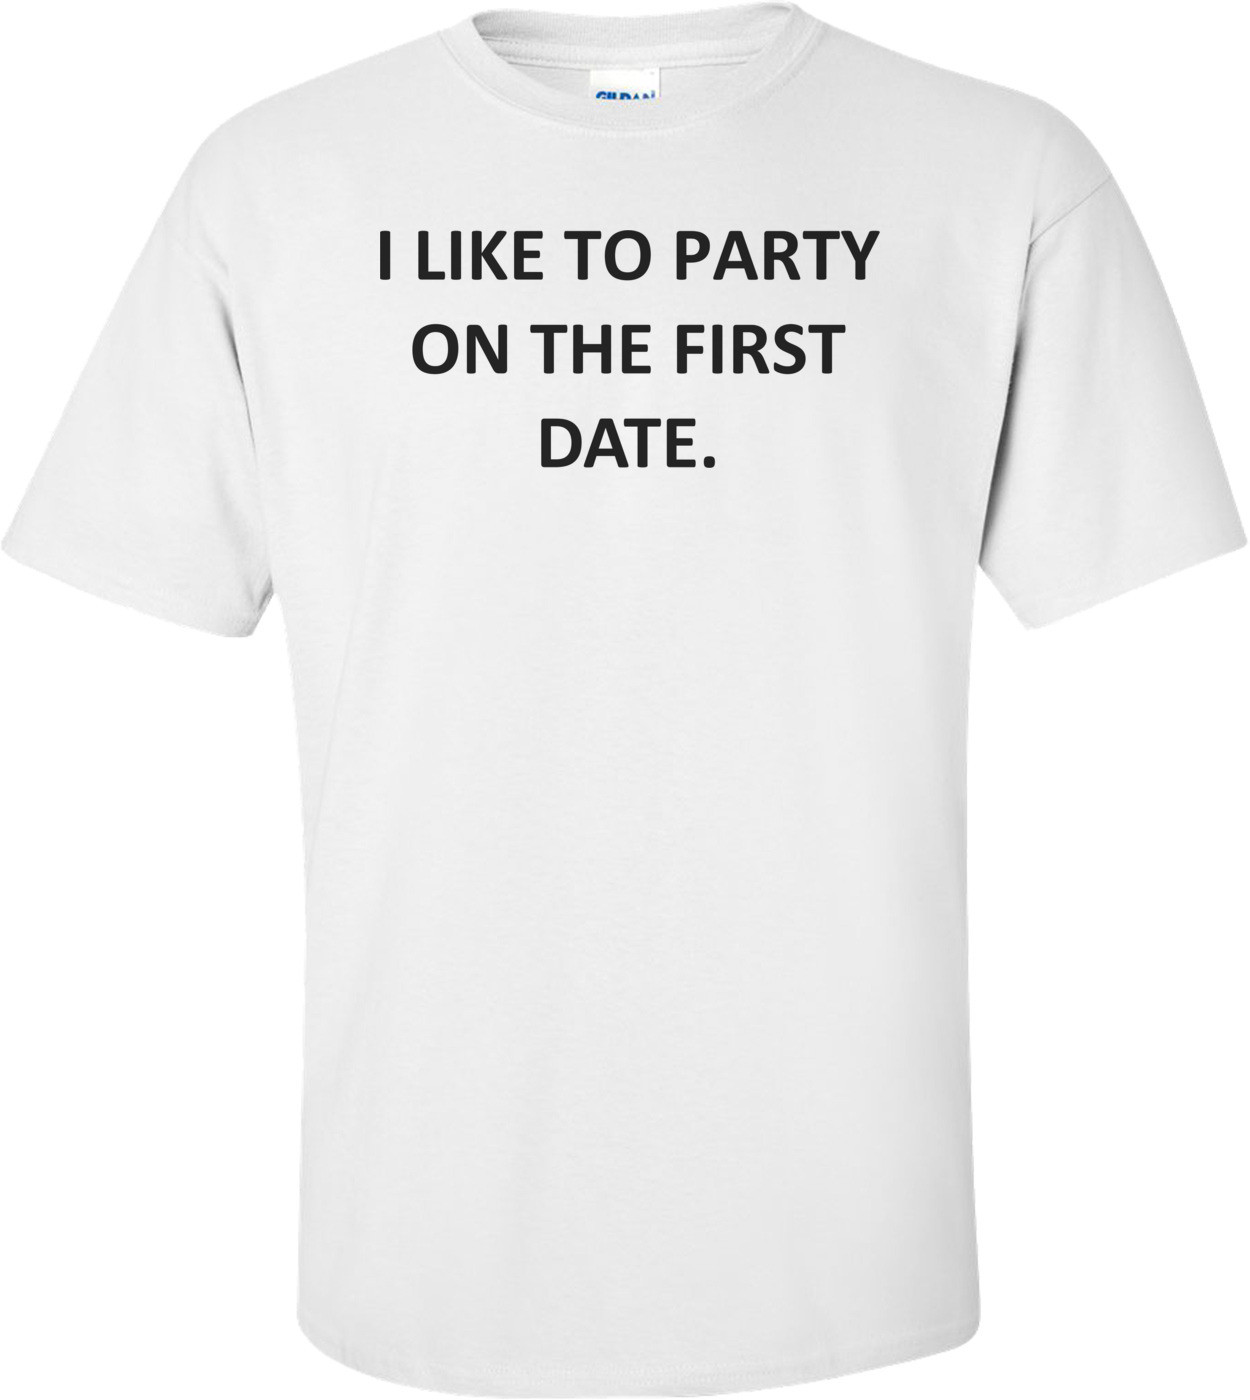 I LIKE TO PARTY ON THE FIRST DATE. Shirt